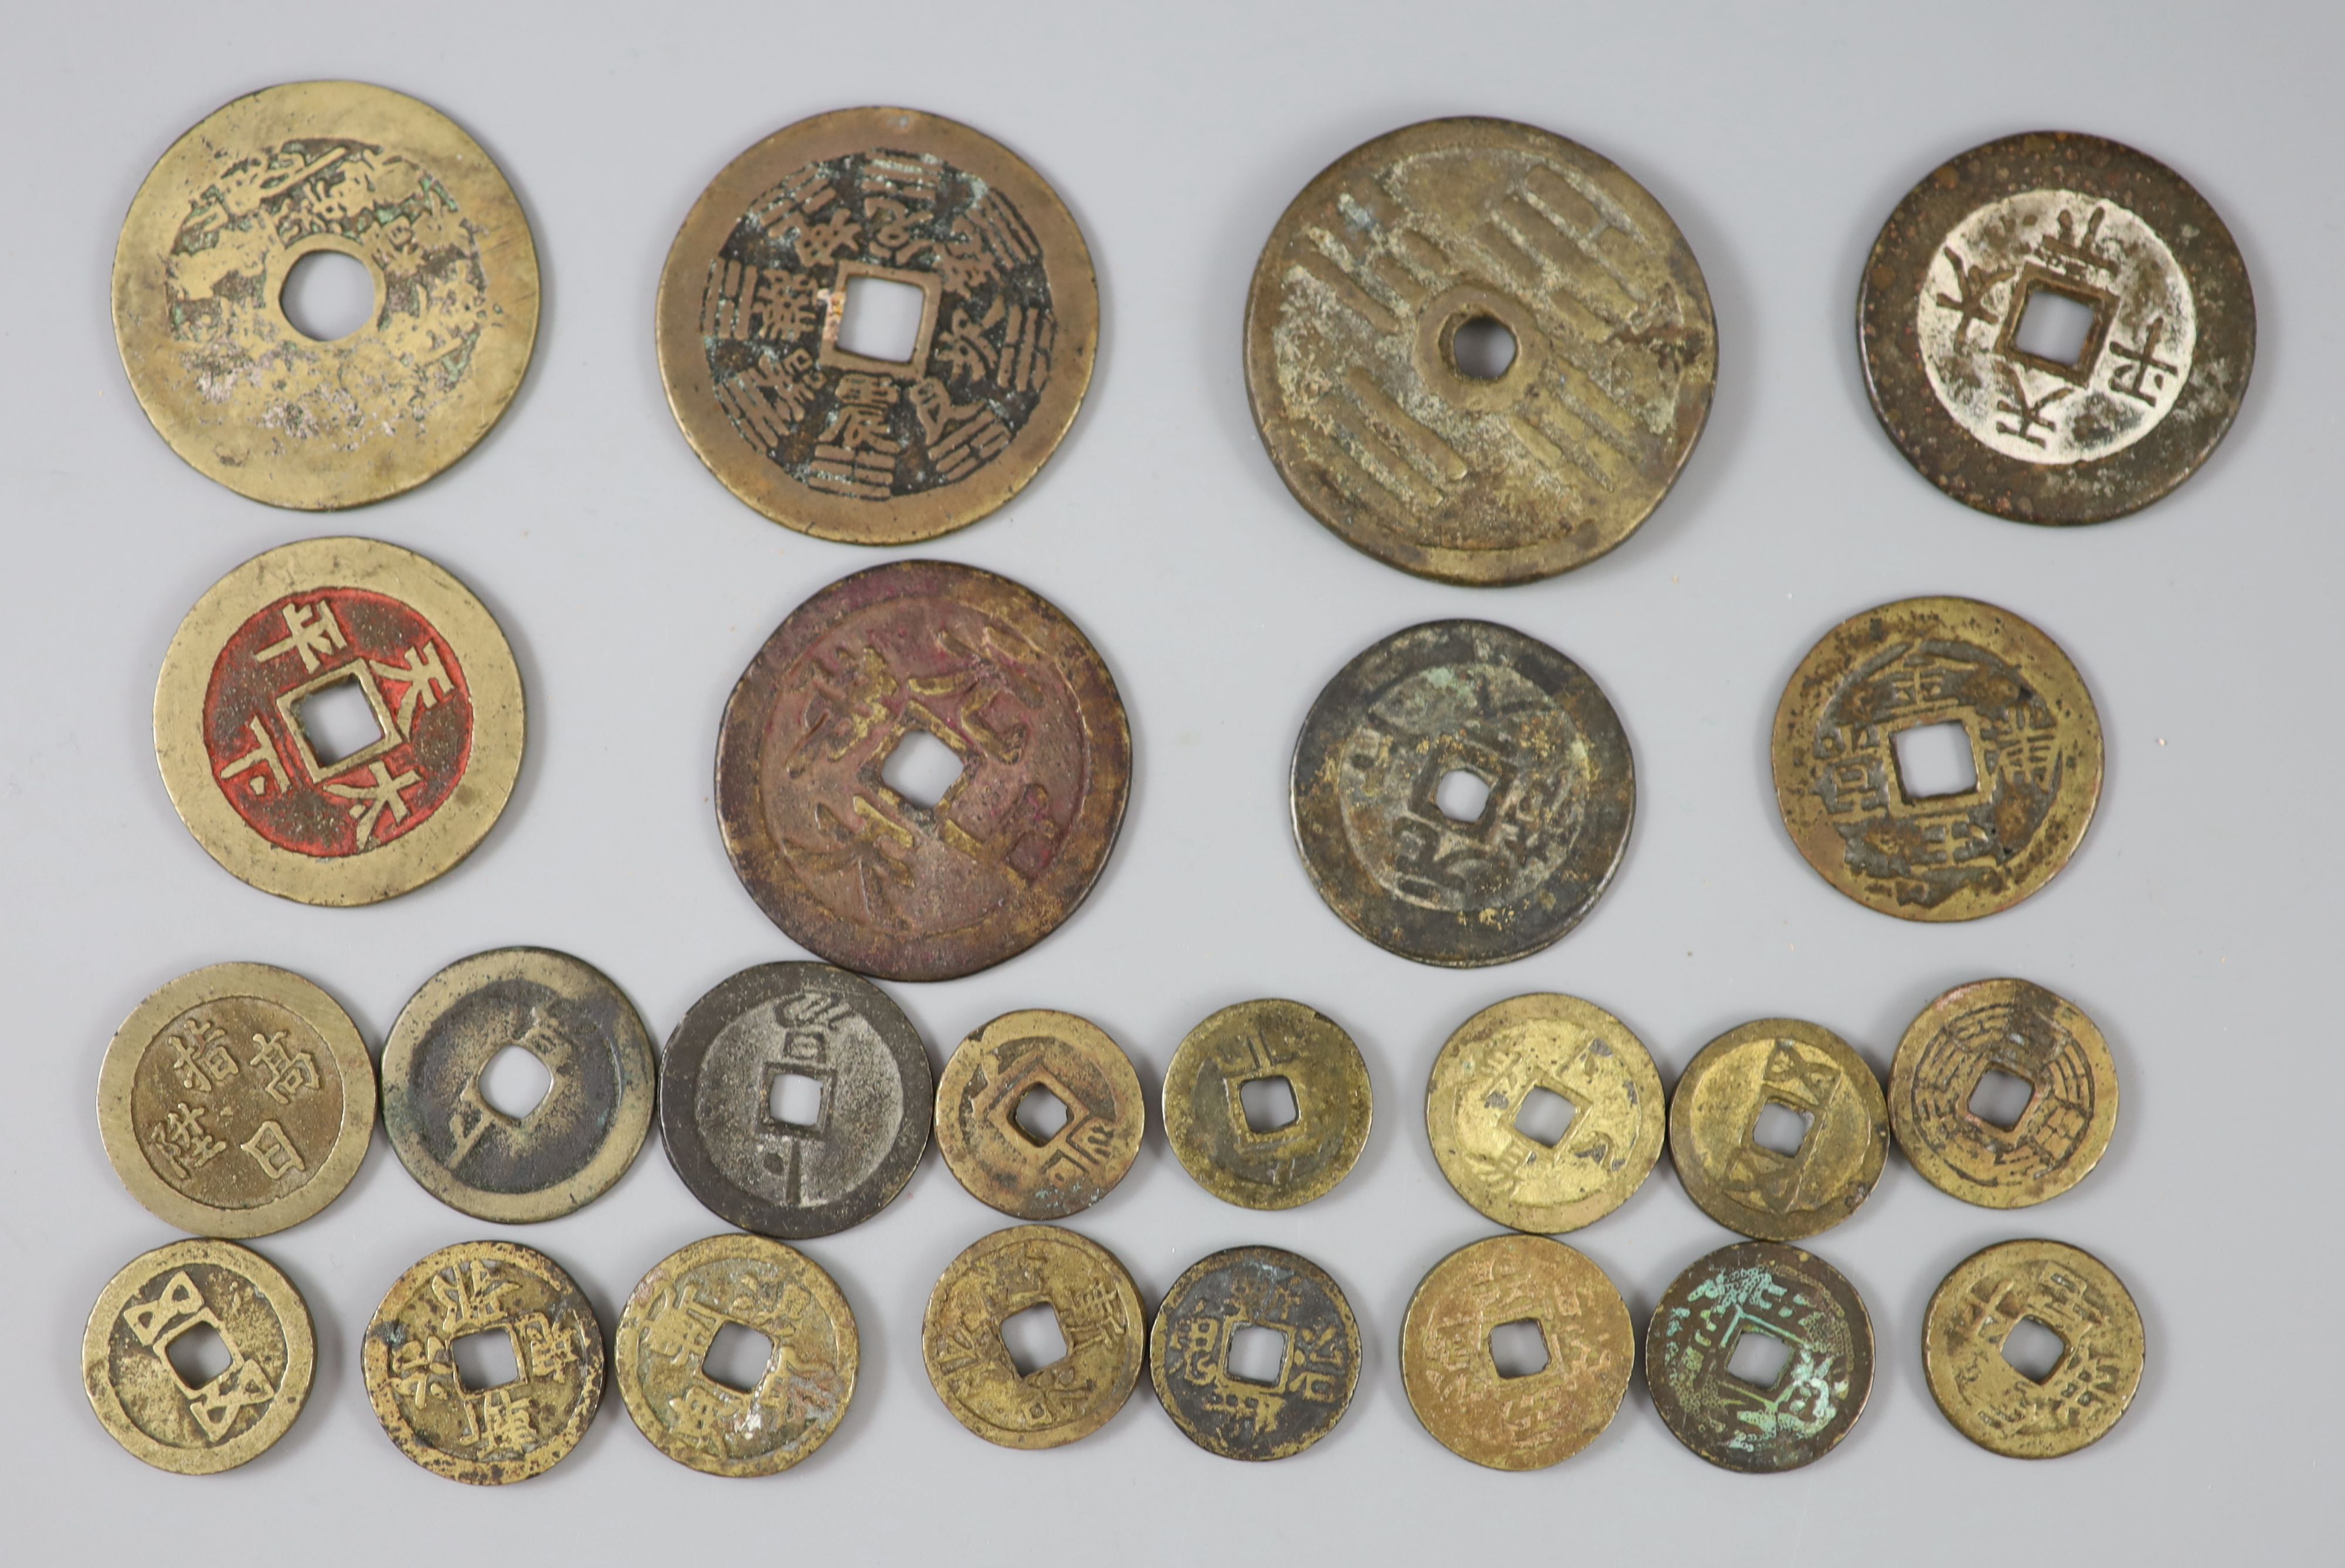 China, 24 bronze charms or amulets, Qing dynasty,